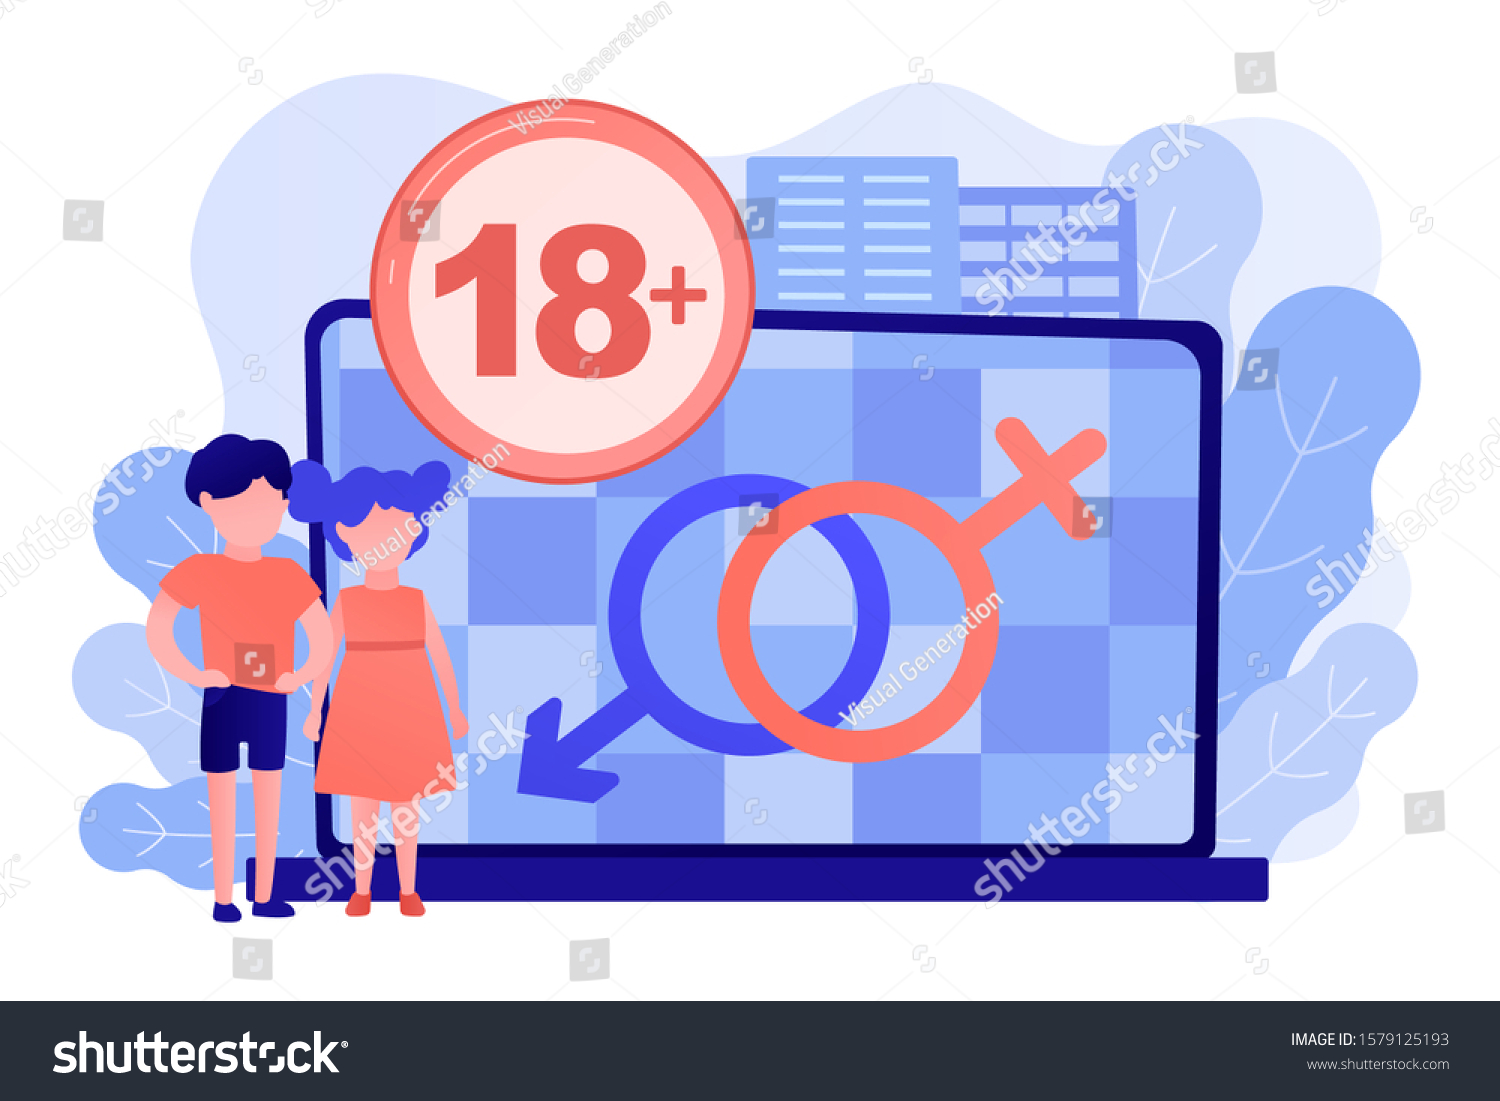 SVG of Children at laptop with adult content restriction for inappropriate video. Adult content, content notification, 18 age restriction concept. Pinkish coral blue vector isolated illustration svg